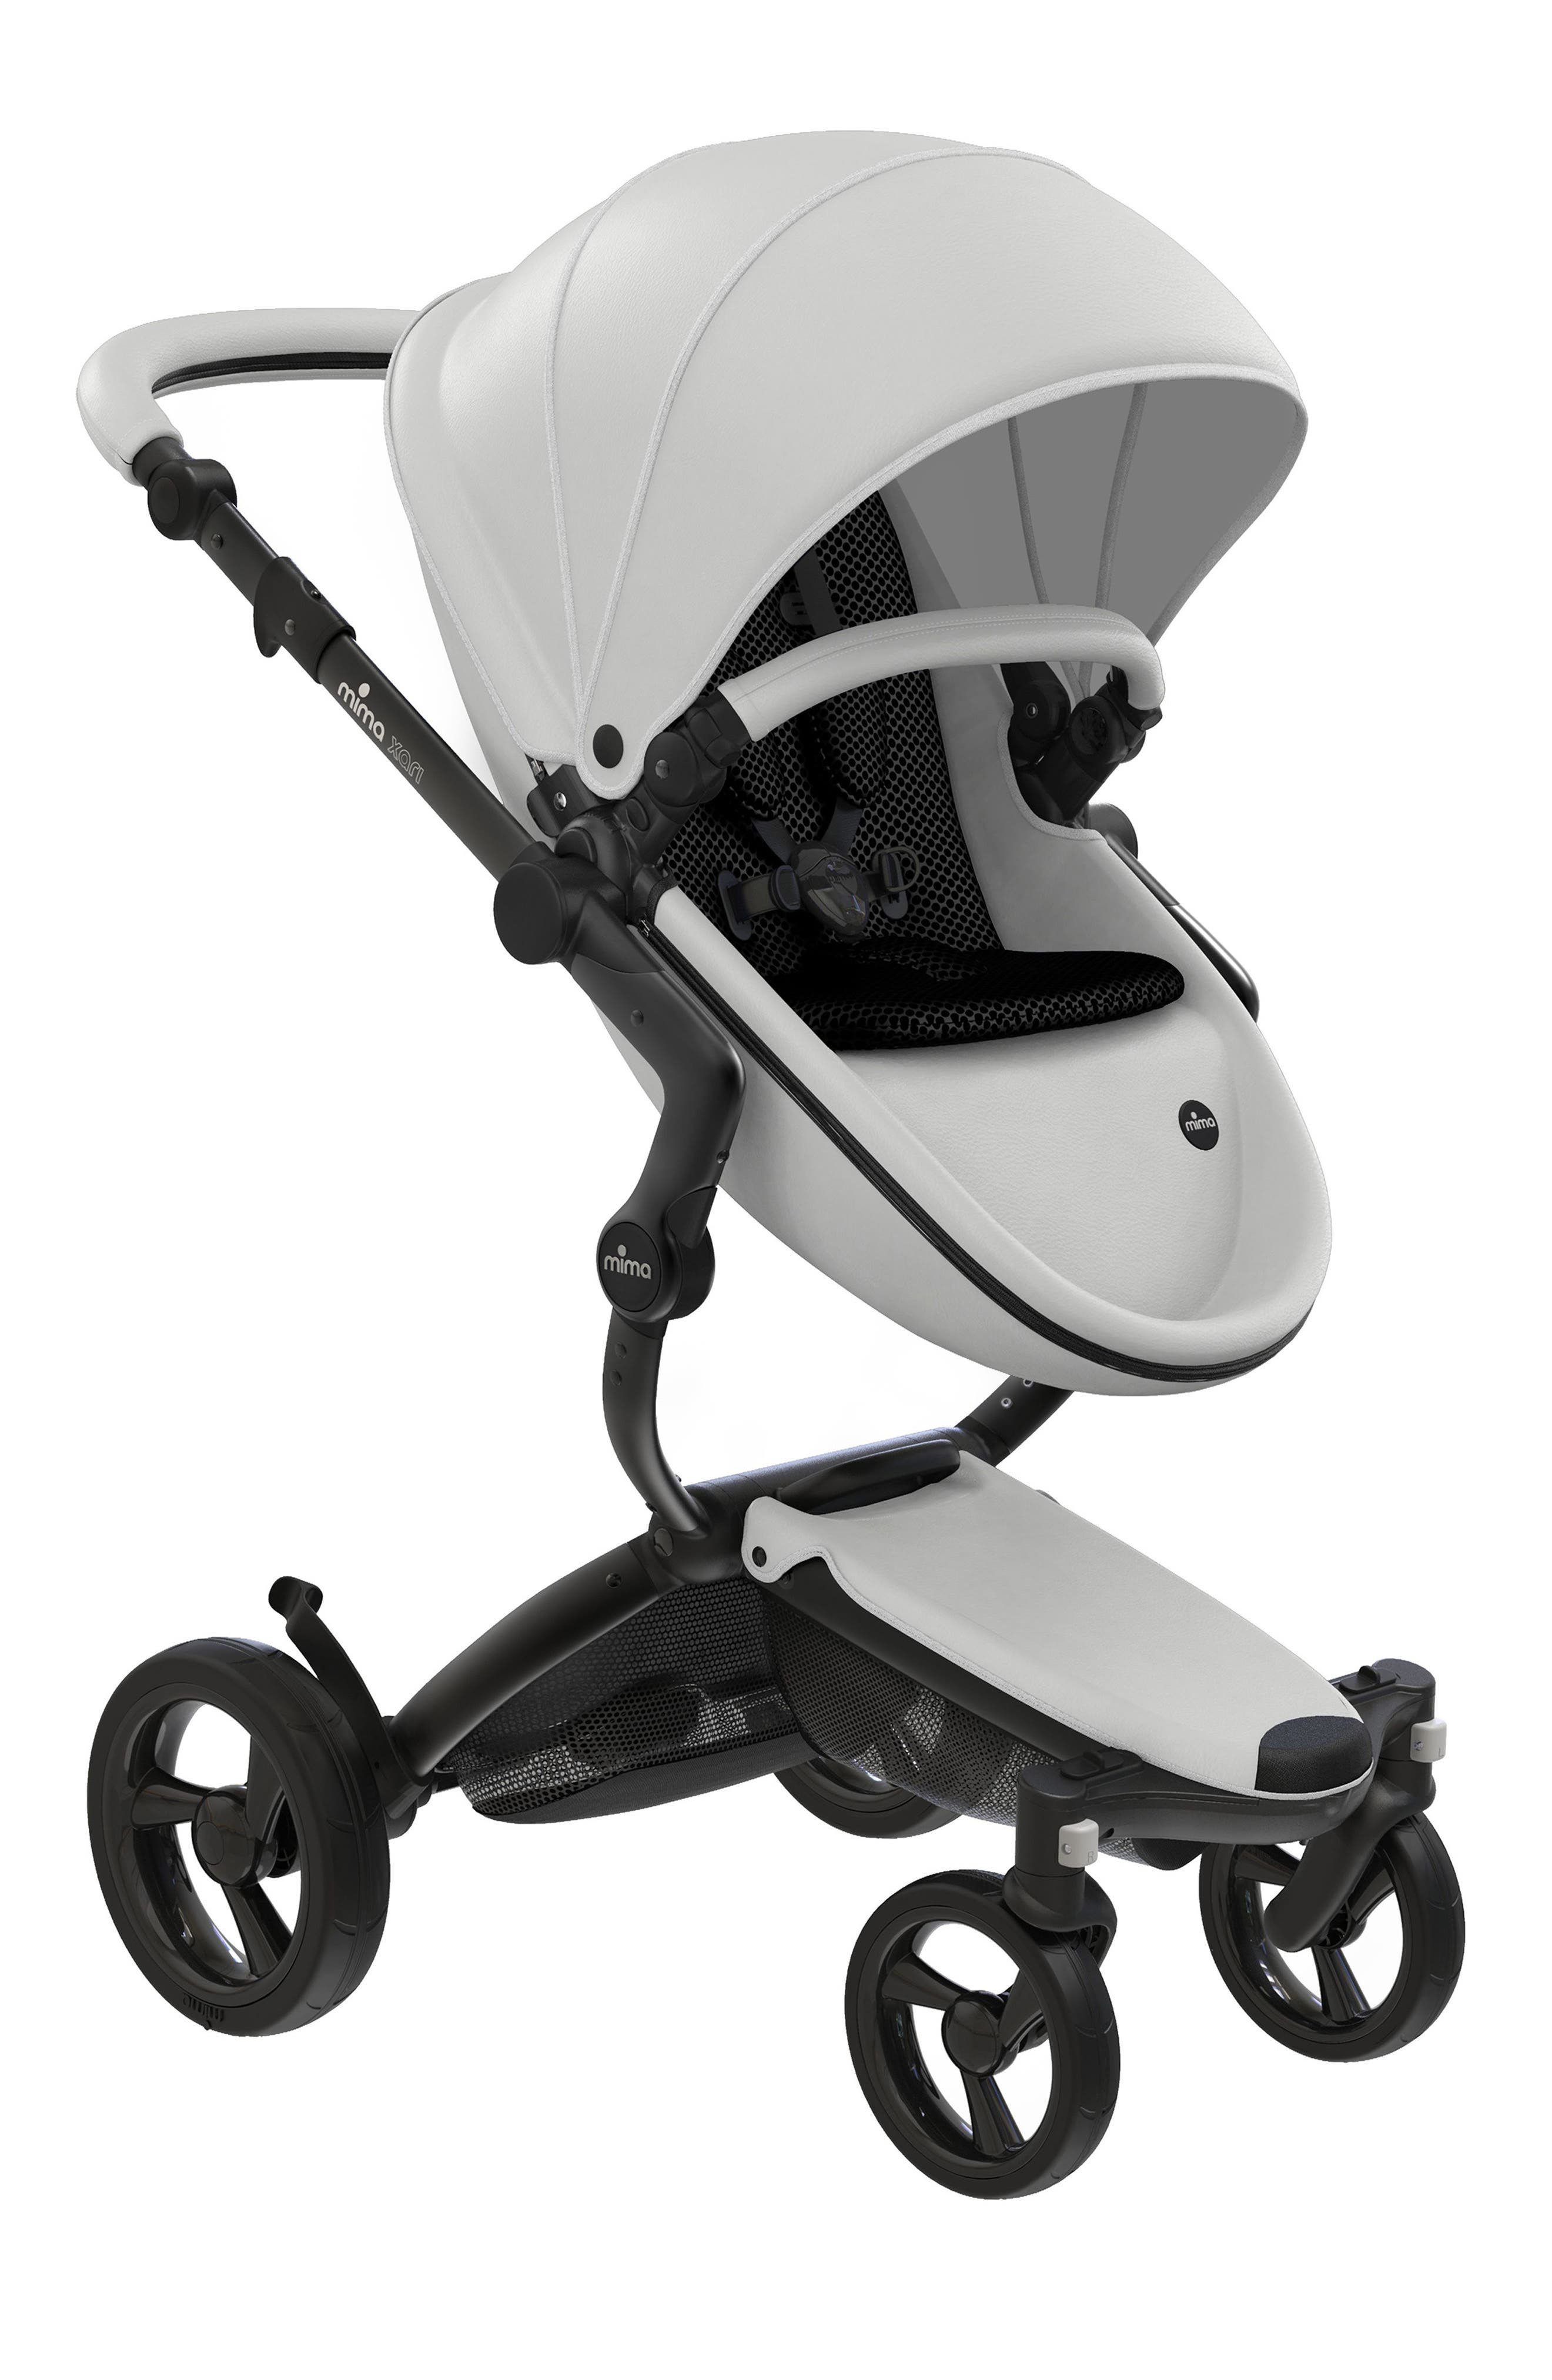 Black Bumper Bar Cover for Mima Baby Kid Strollers 